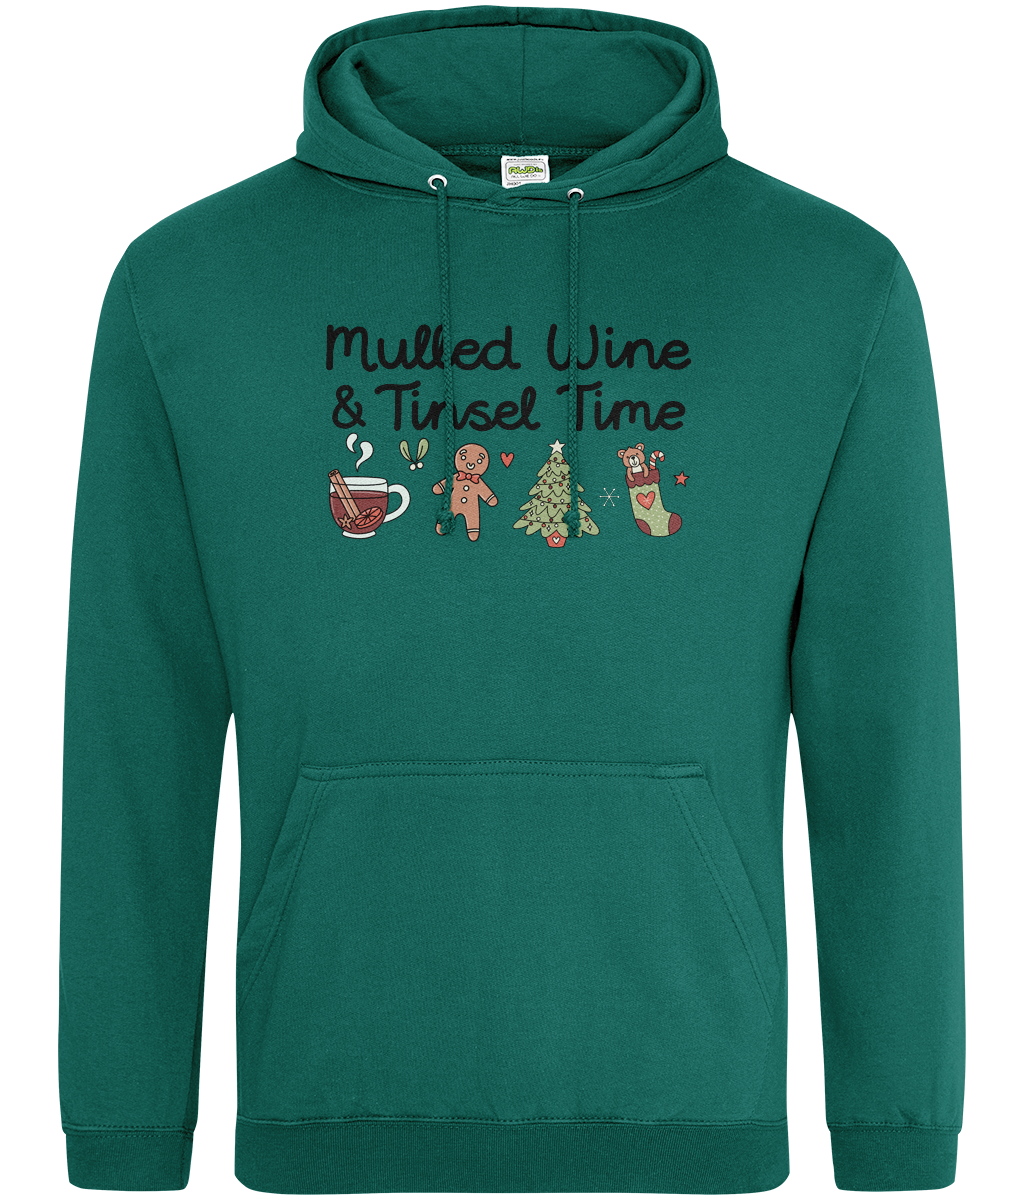 Mulled Wine & Tinsel Time - Adult Hoodie - Multi Colour Available